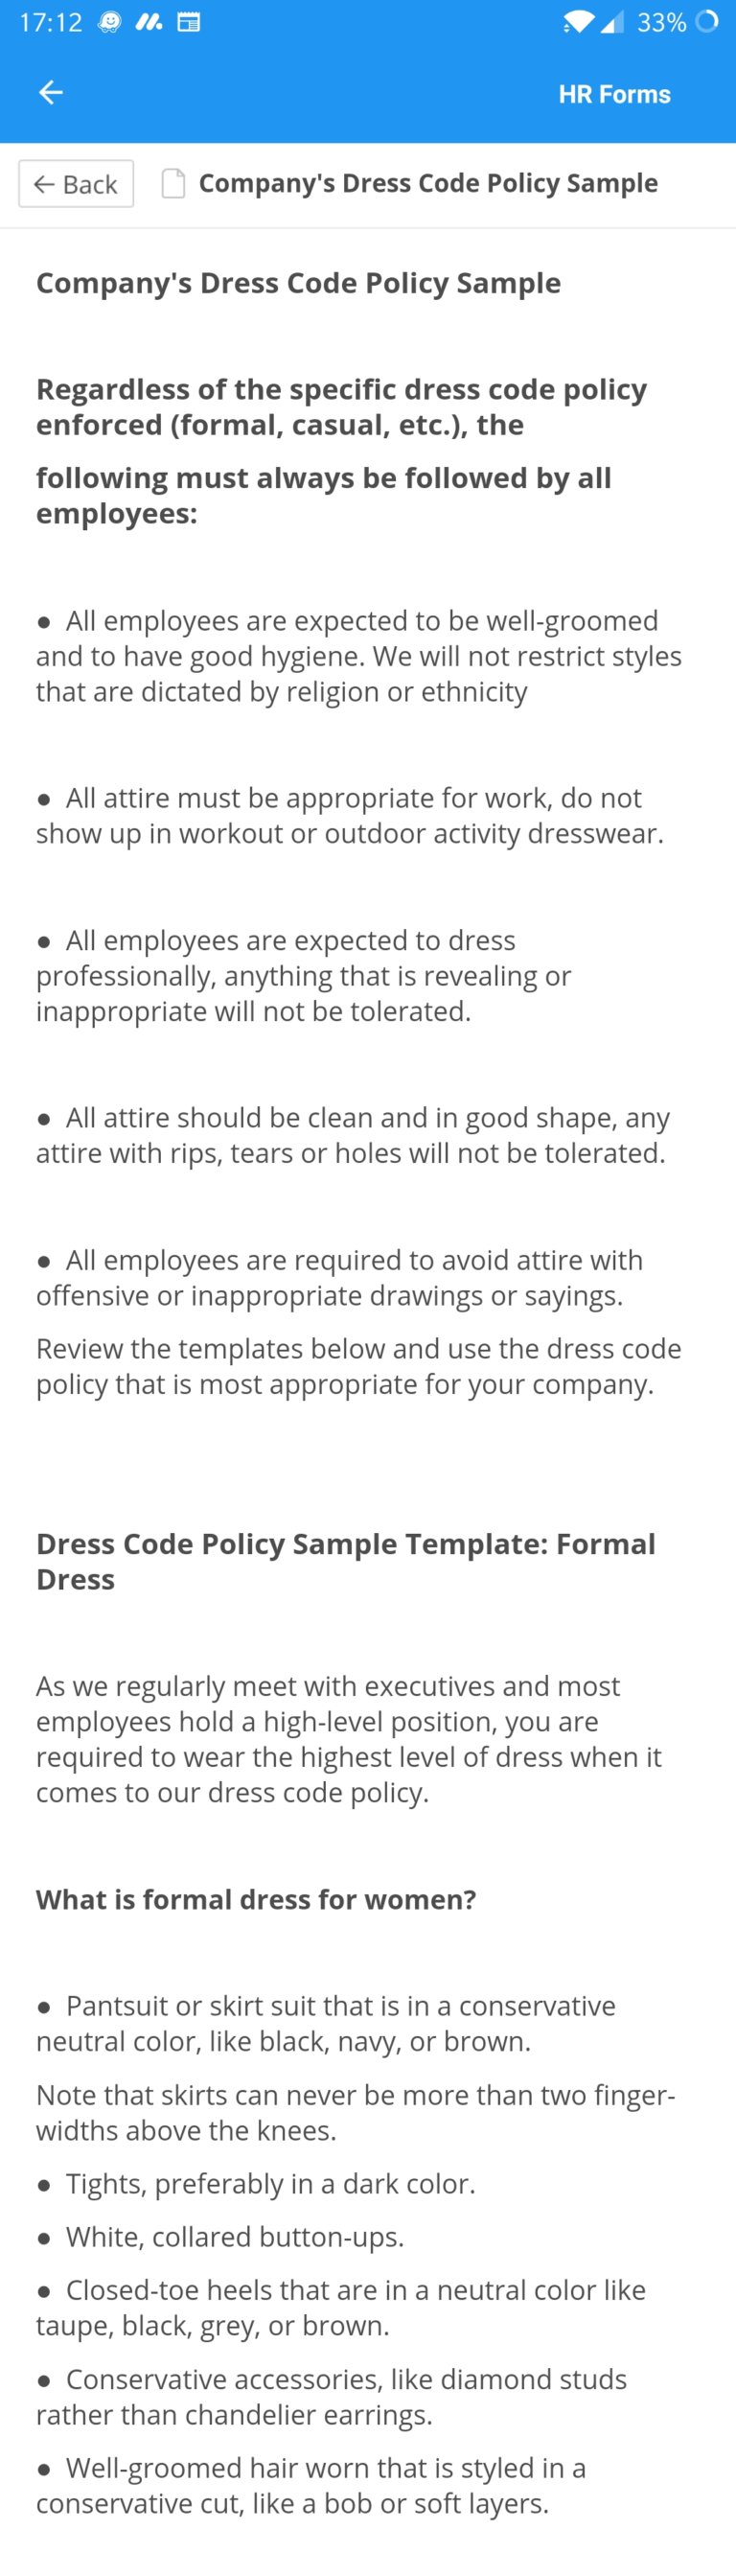 inappropriate dress code for work